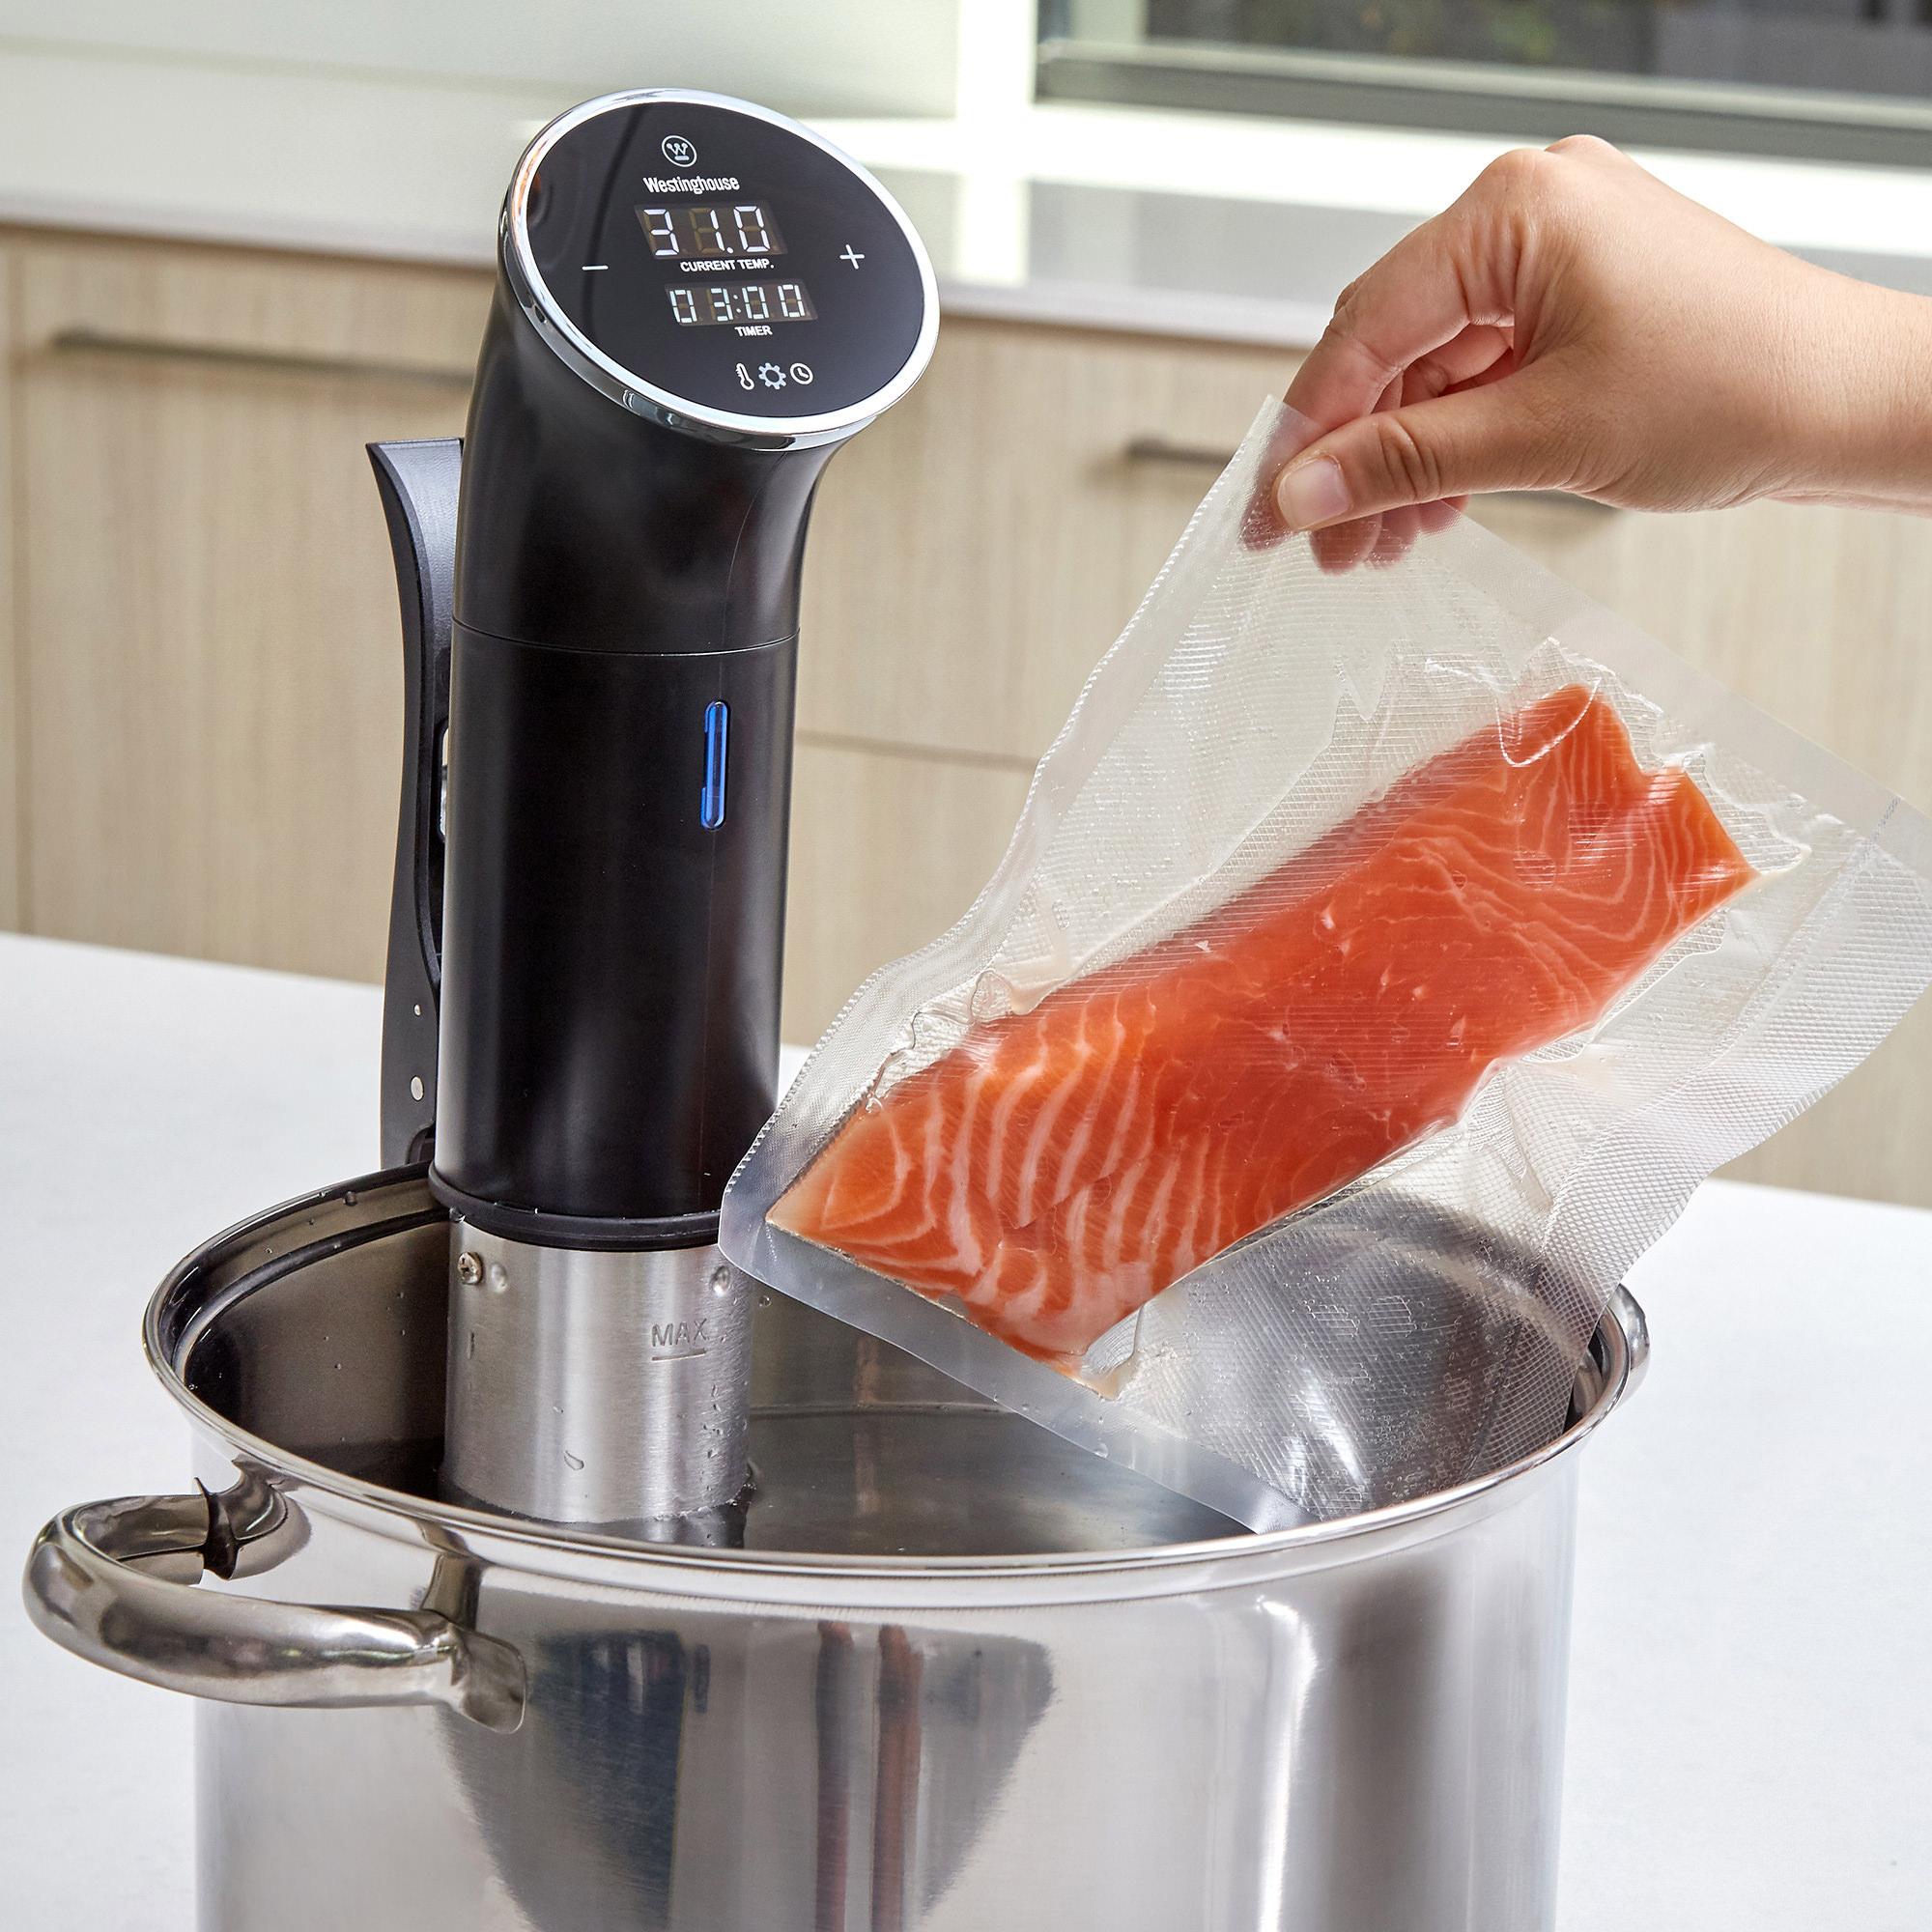 Westinghouse Sous Vide Immersion Cooker Image 5